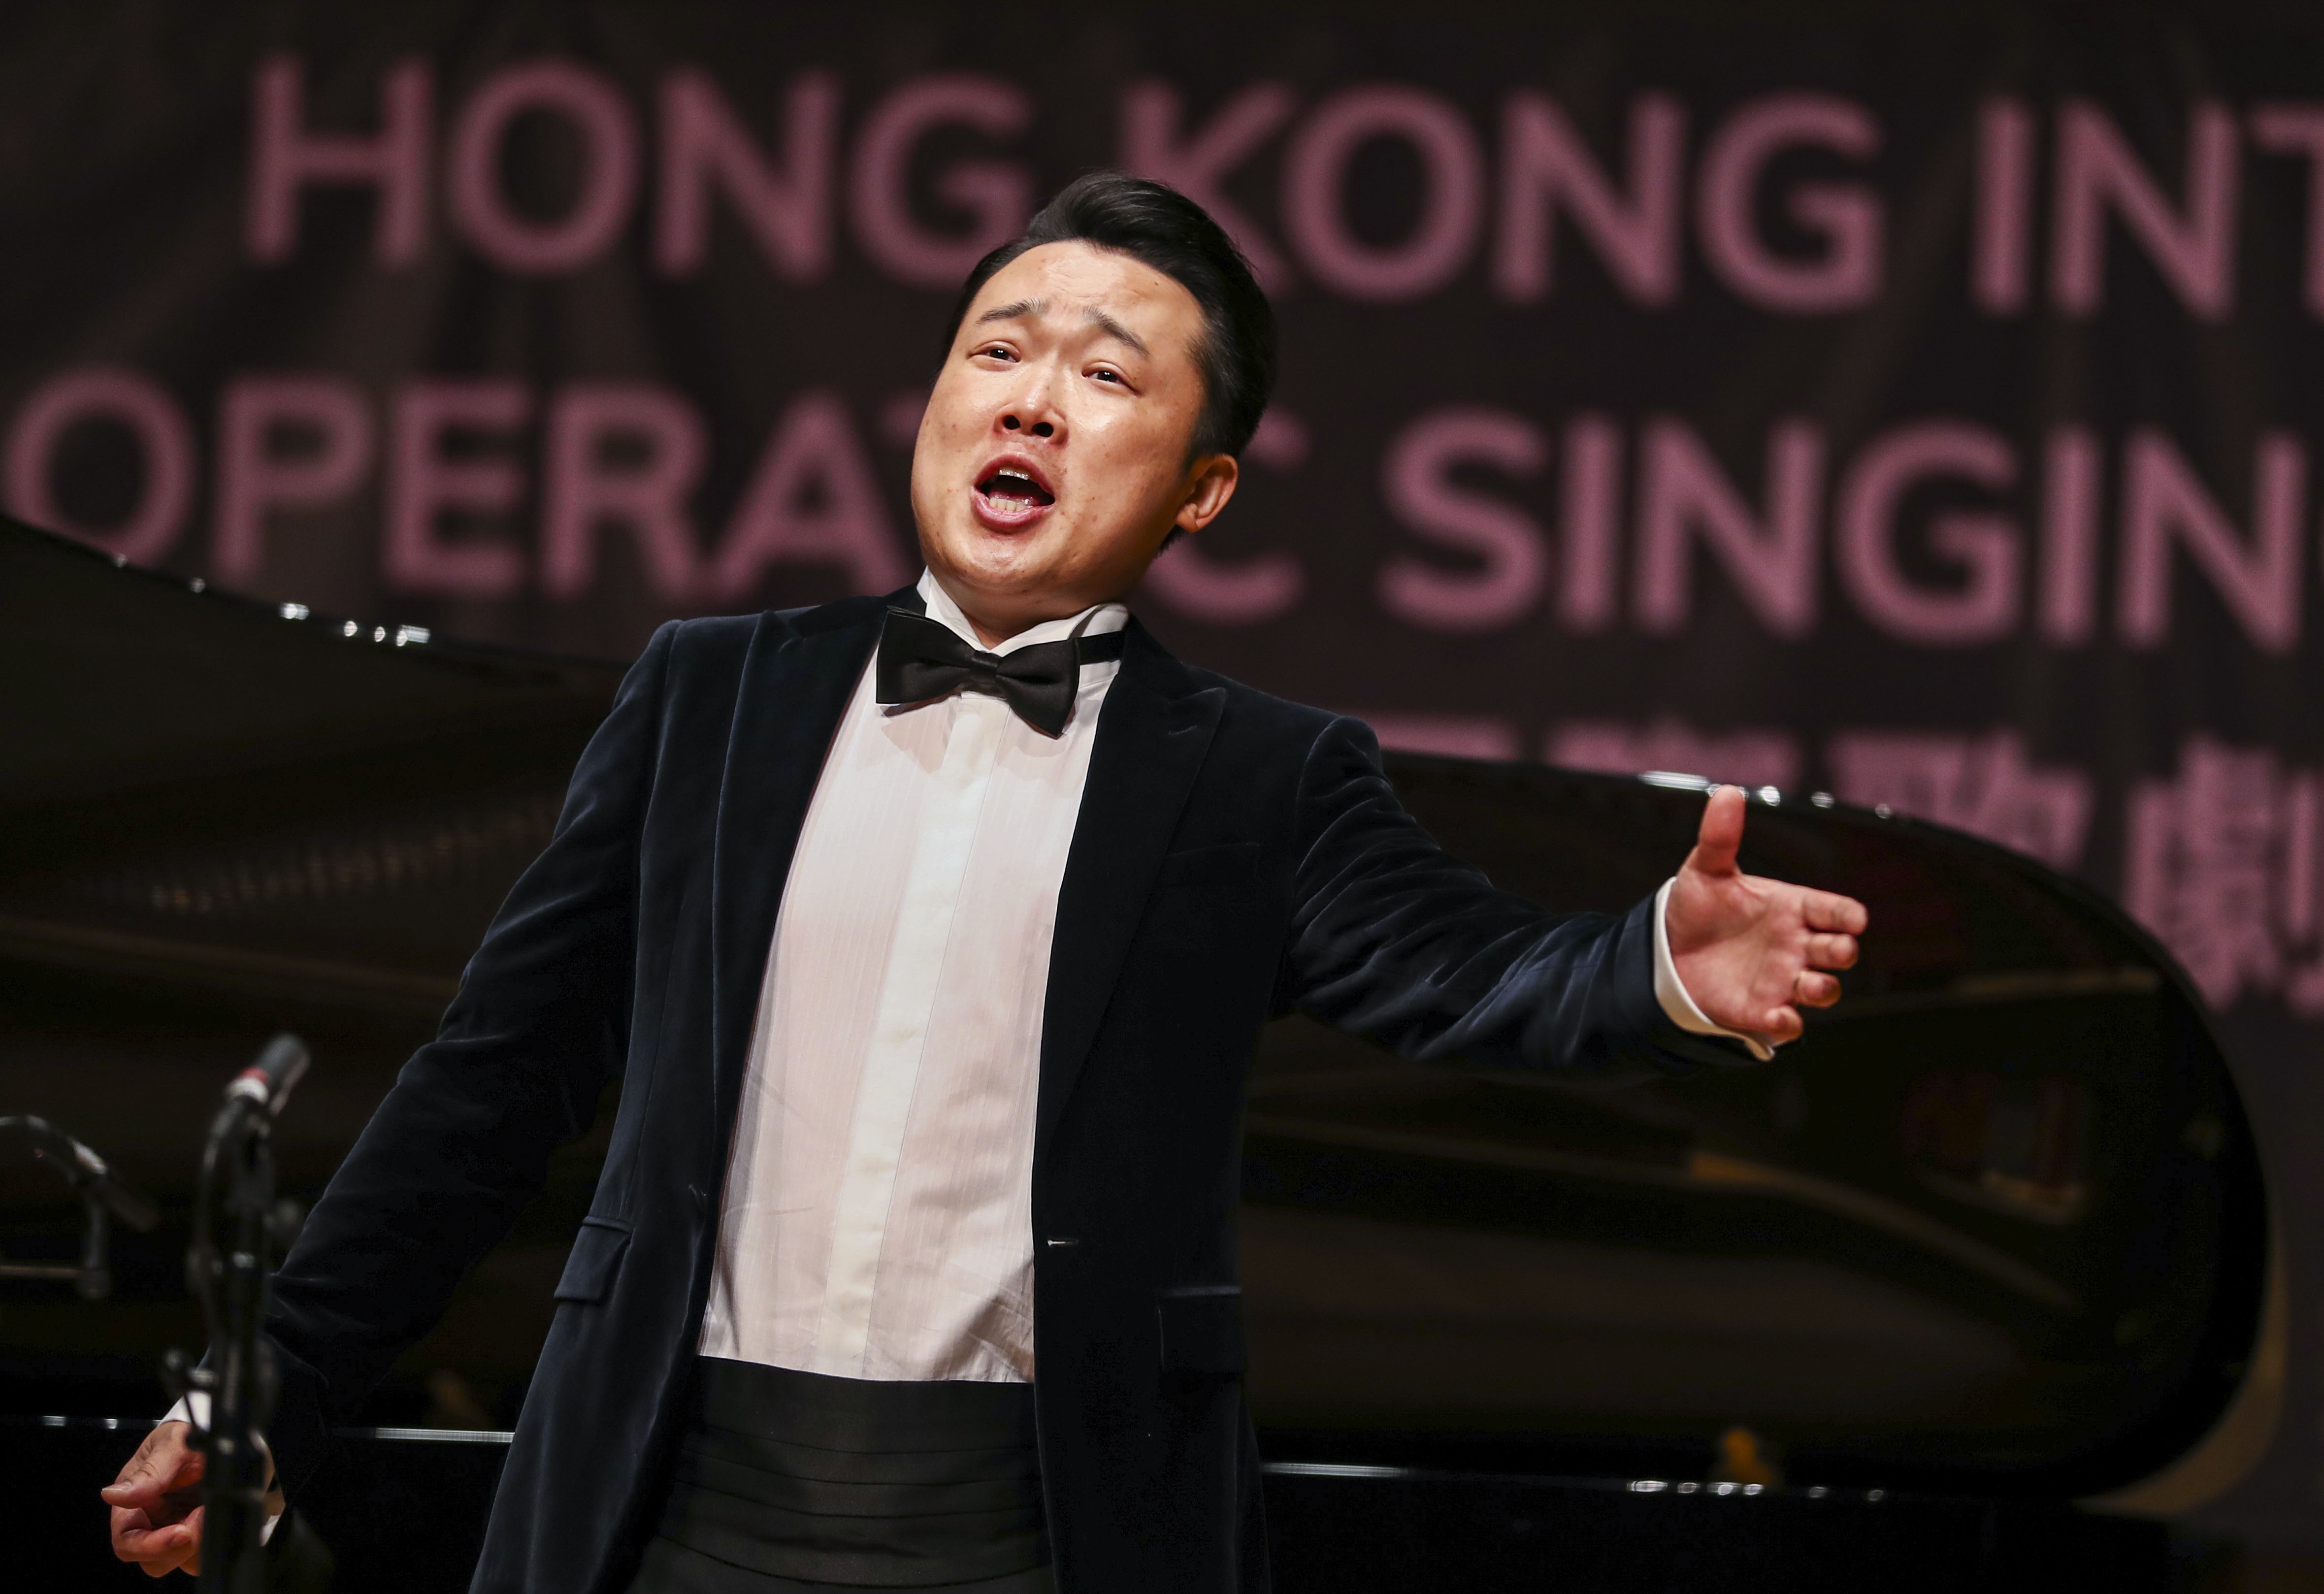 Hong Kong tenor Chen Yong performing during the semi-final round of the Hong Kong International Operatic Singing Competition held at City Hall in Central. Photo: Nora Tam